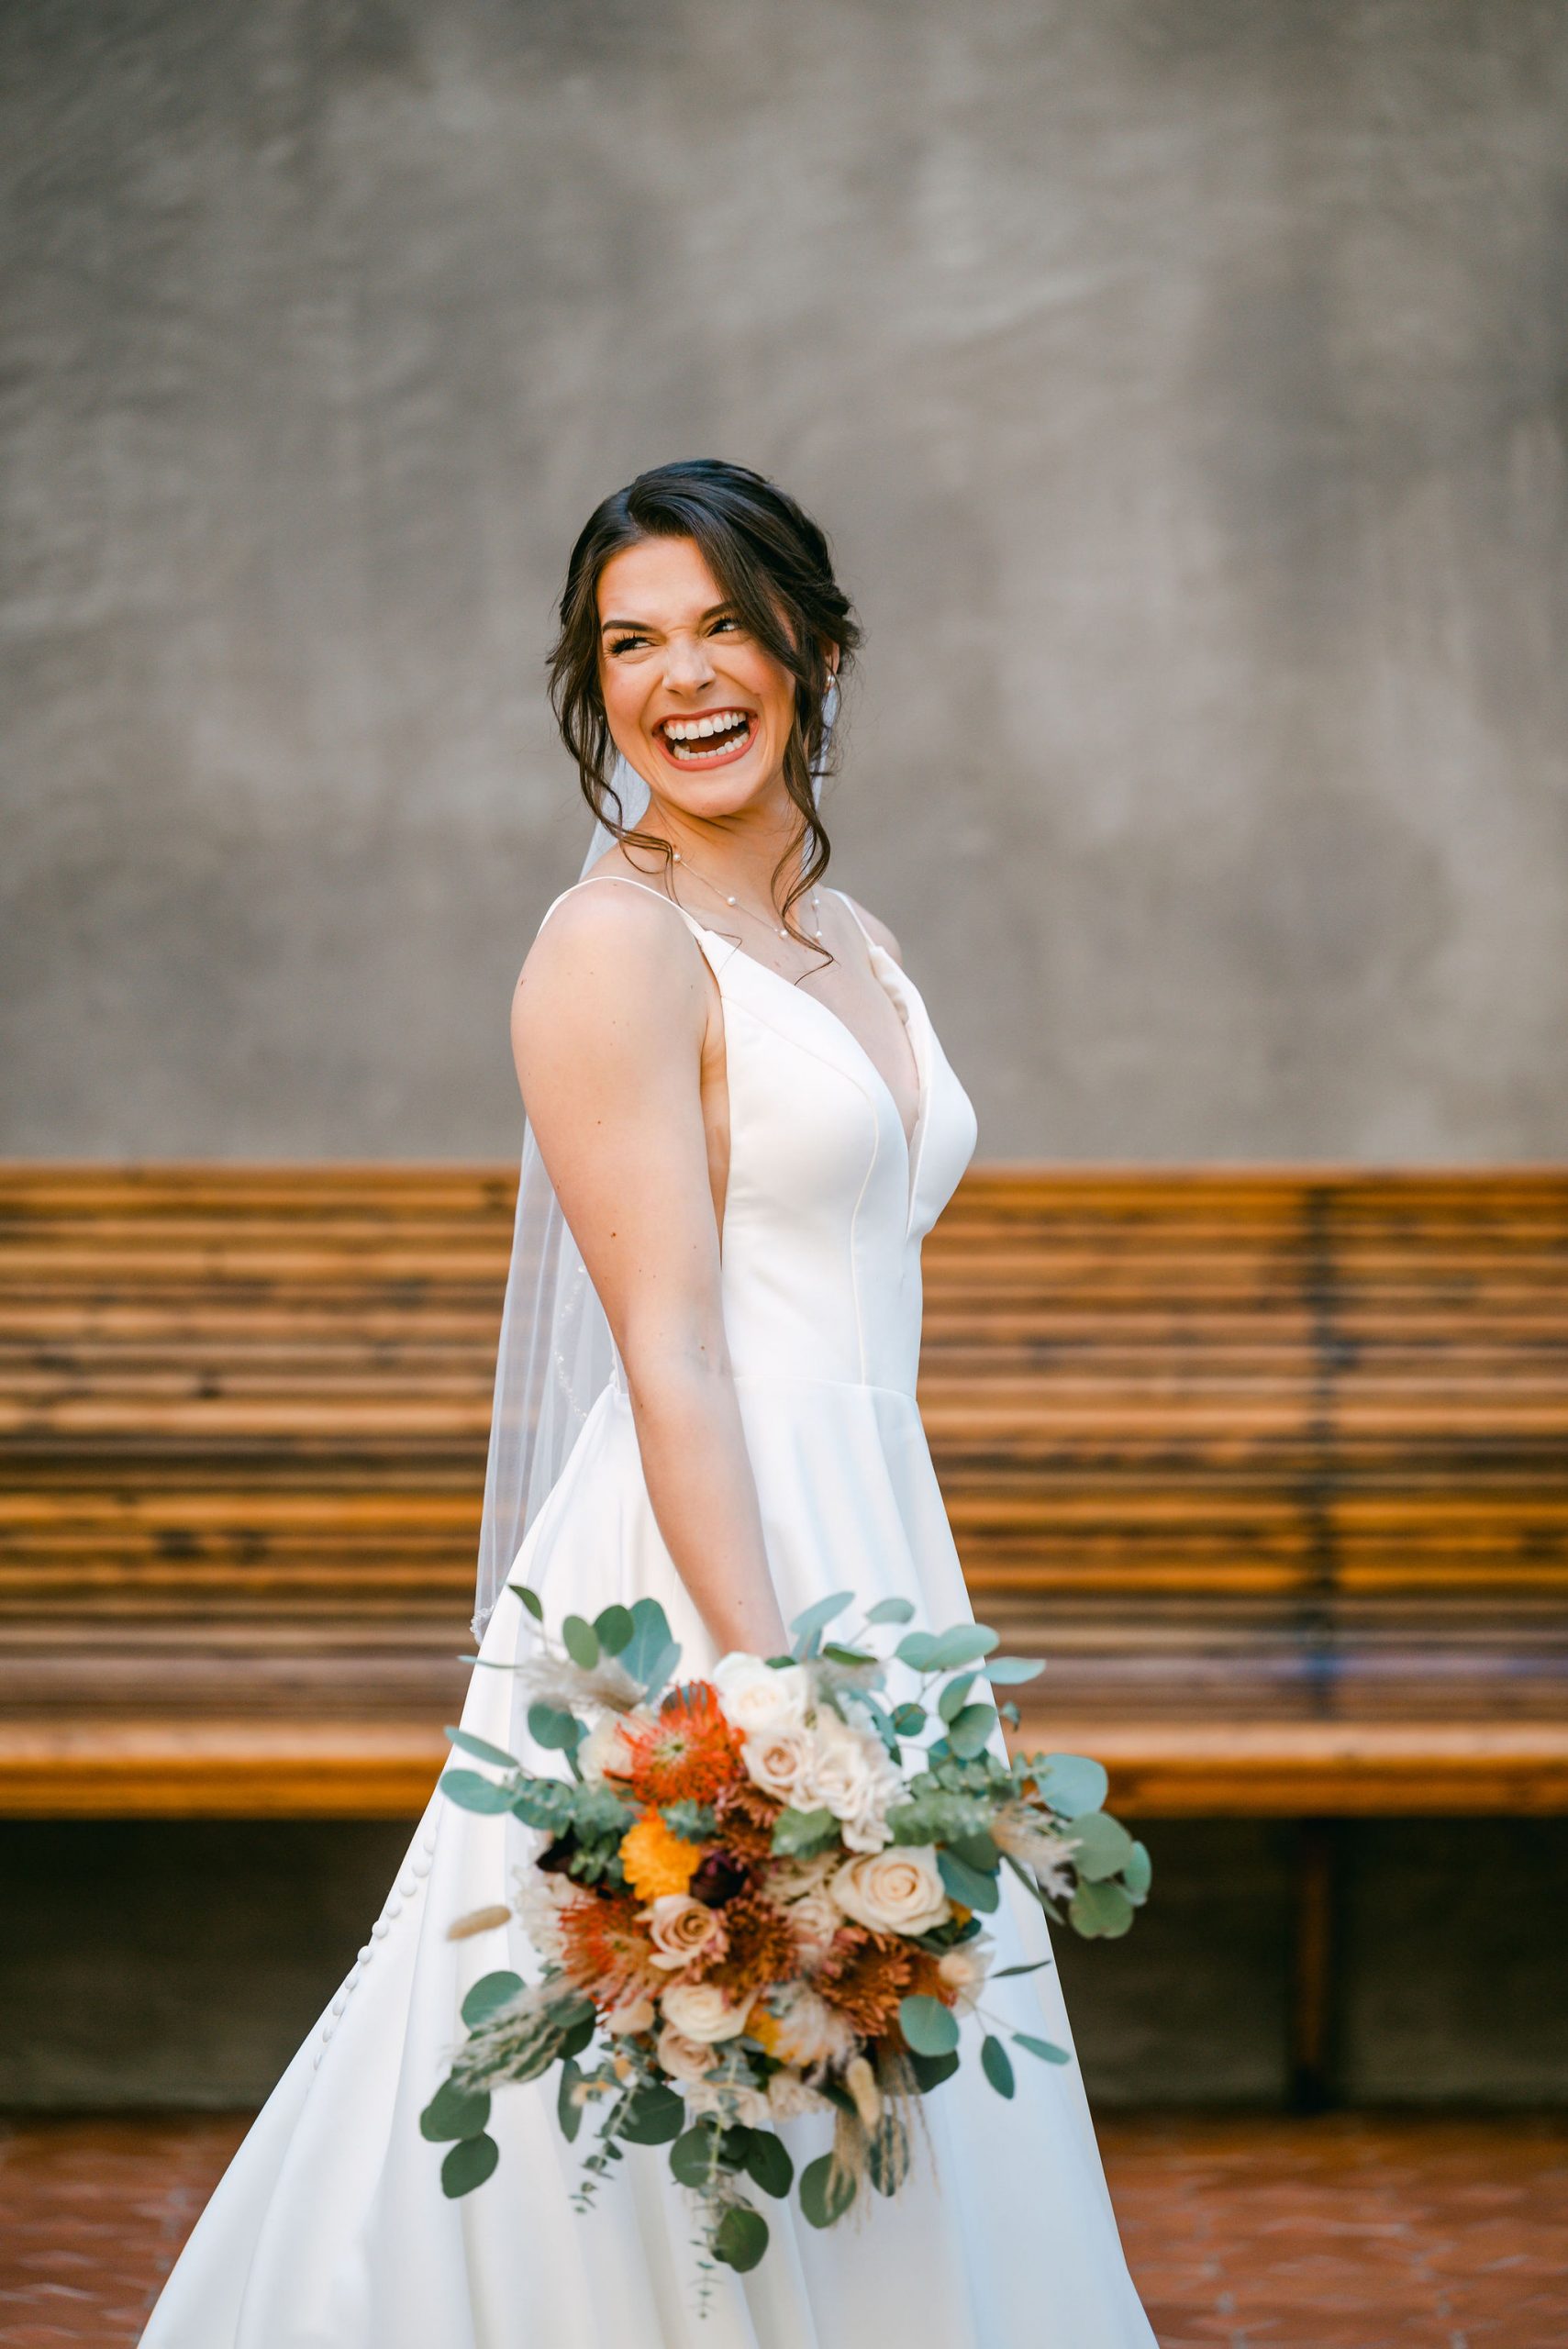 bride-laughs-against-rustic-stone-wall-hotel-emma